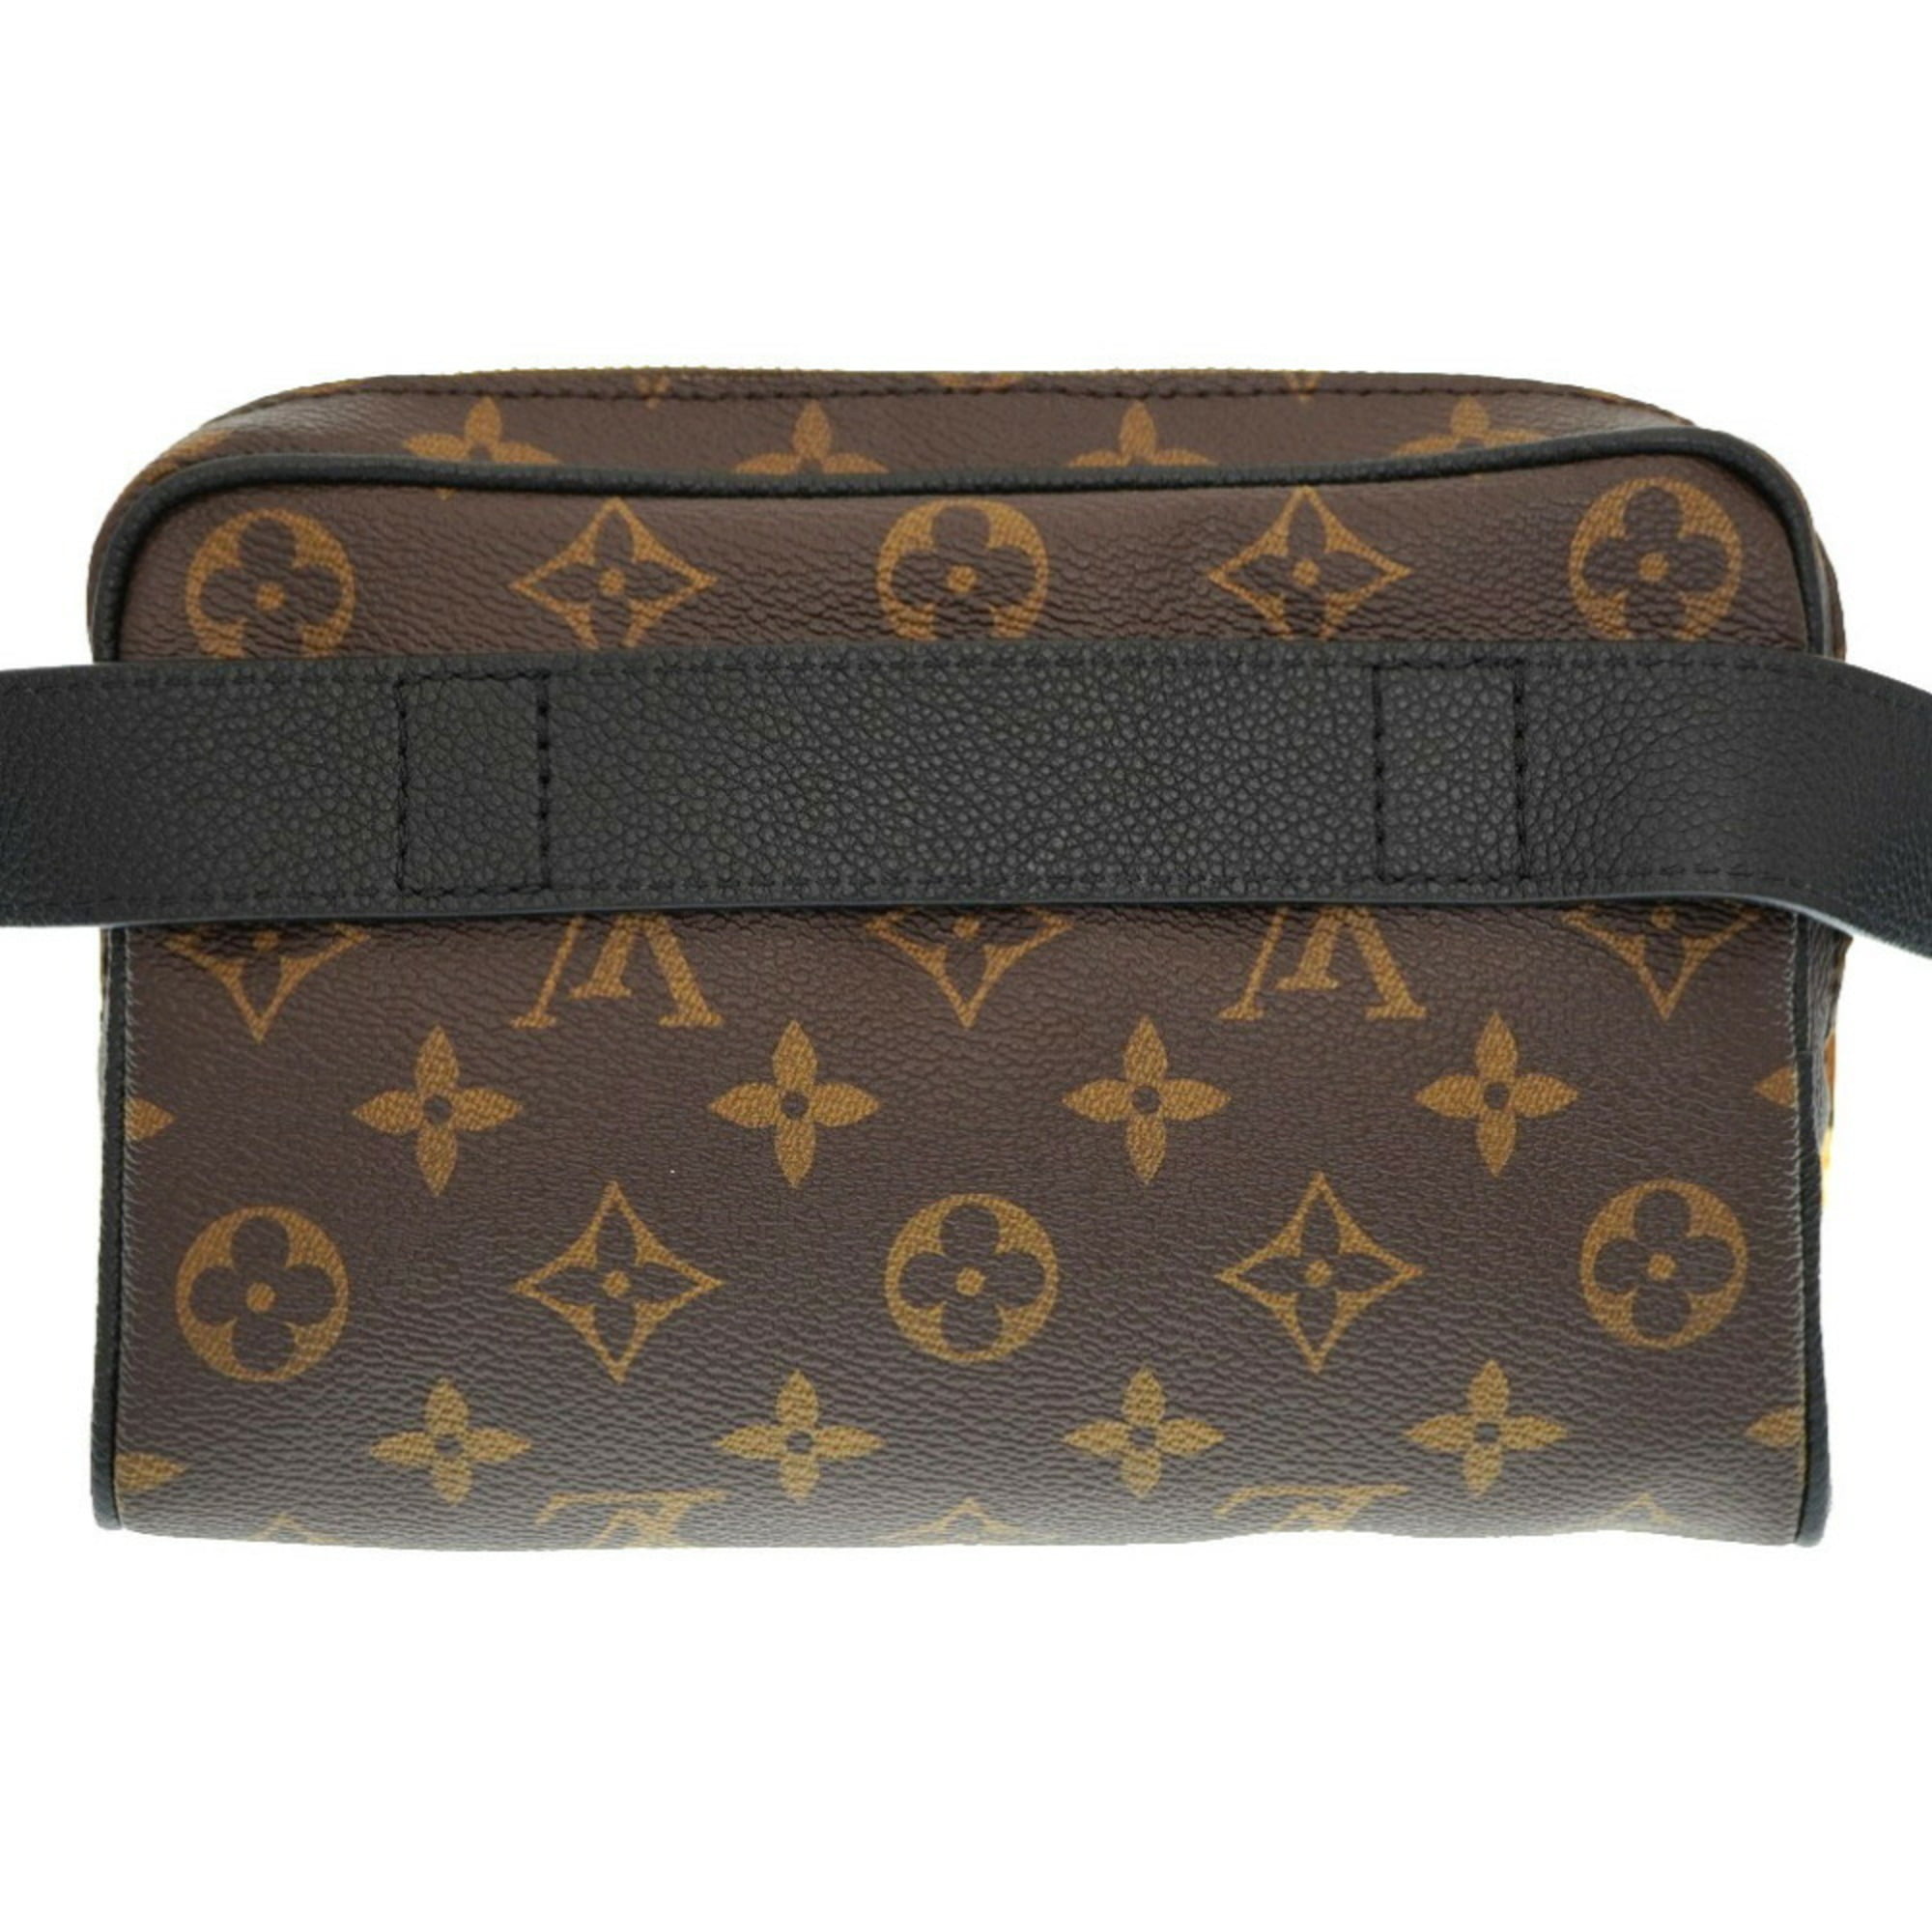 Authenticated Used Louis Vuitton Monogram Bumbag Outdoor Belt Bag 